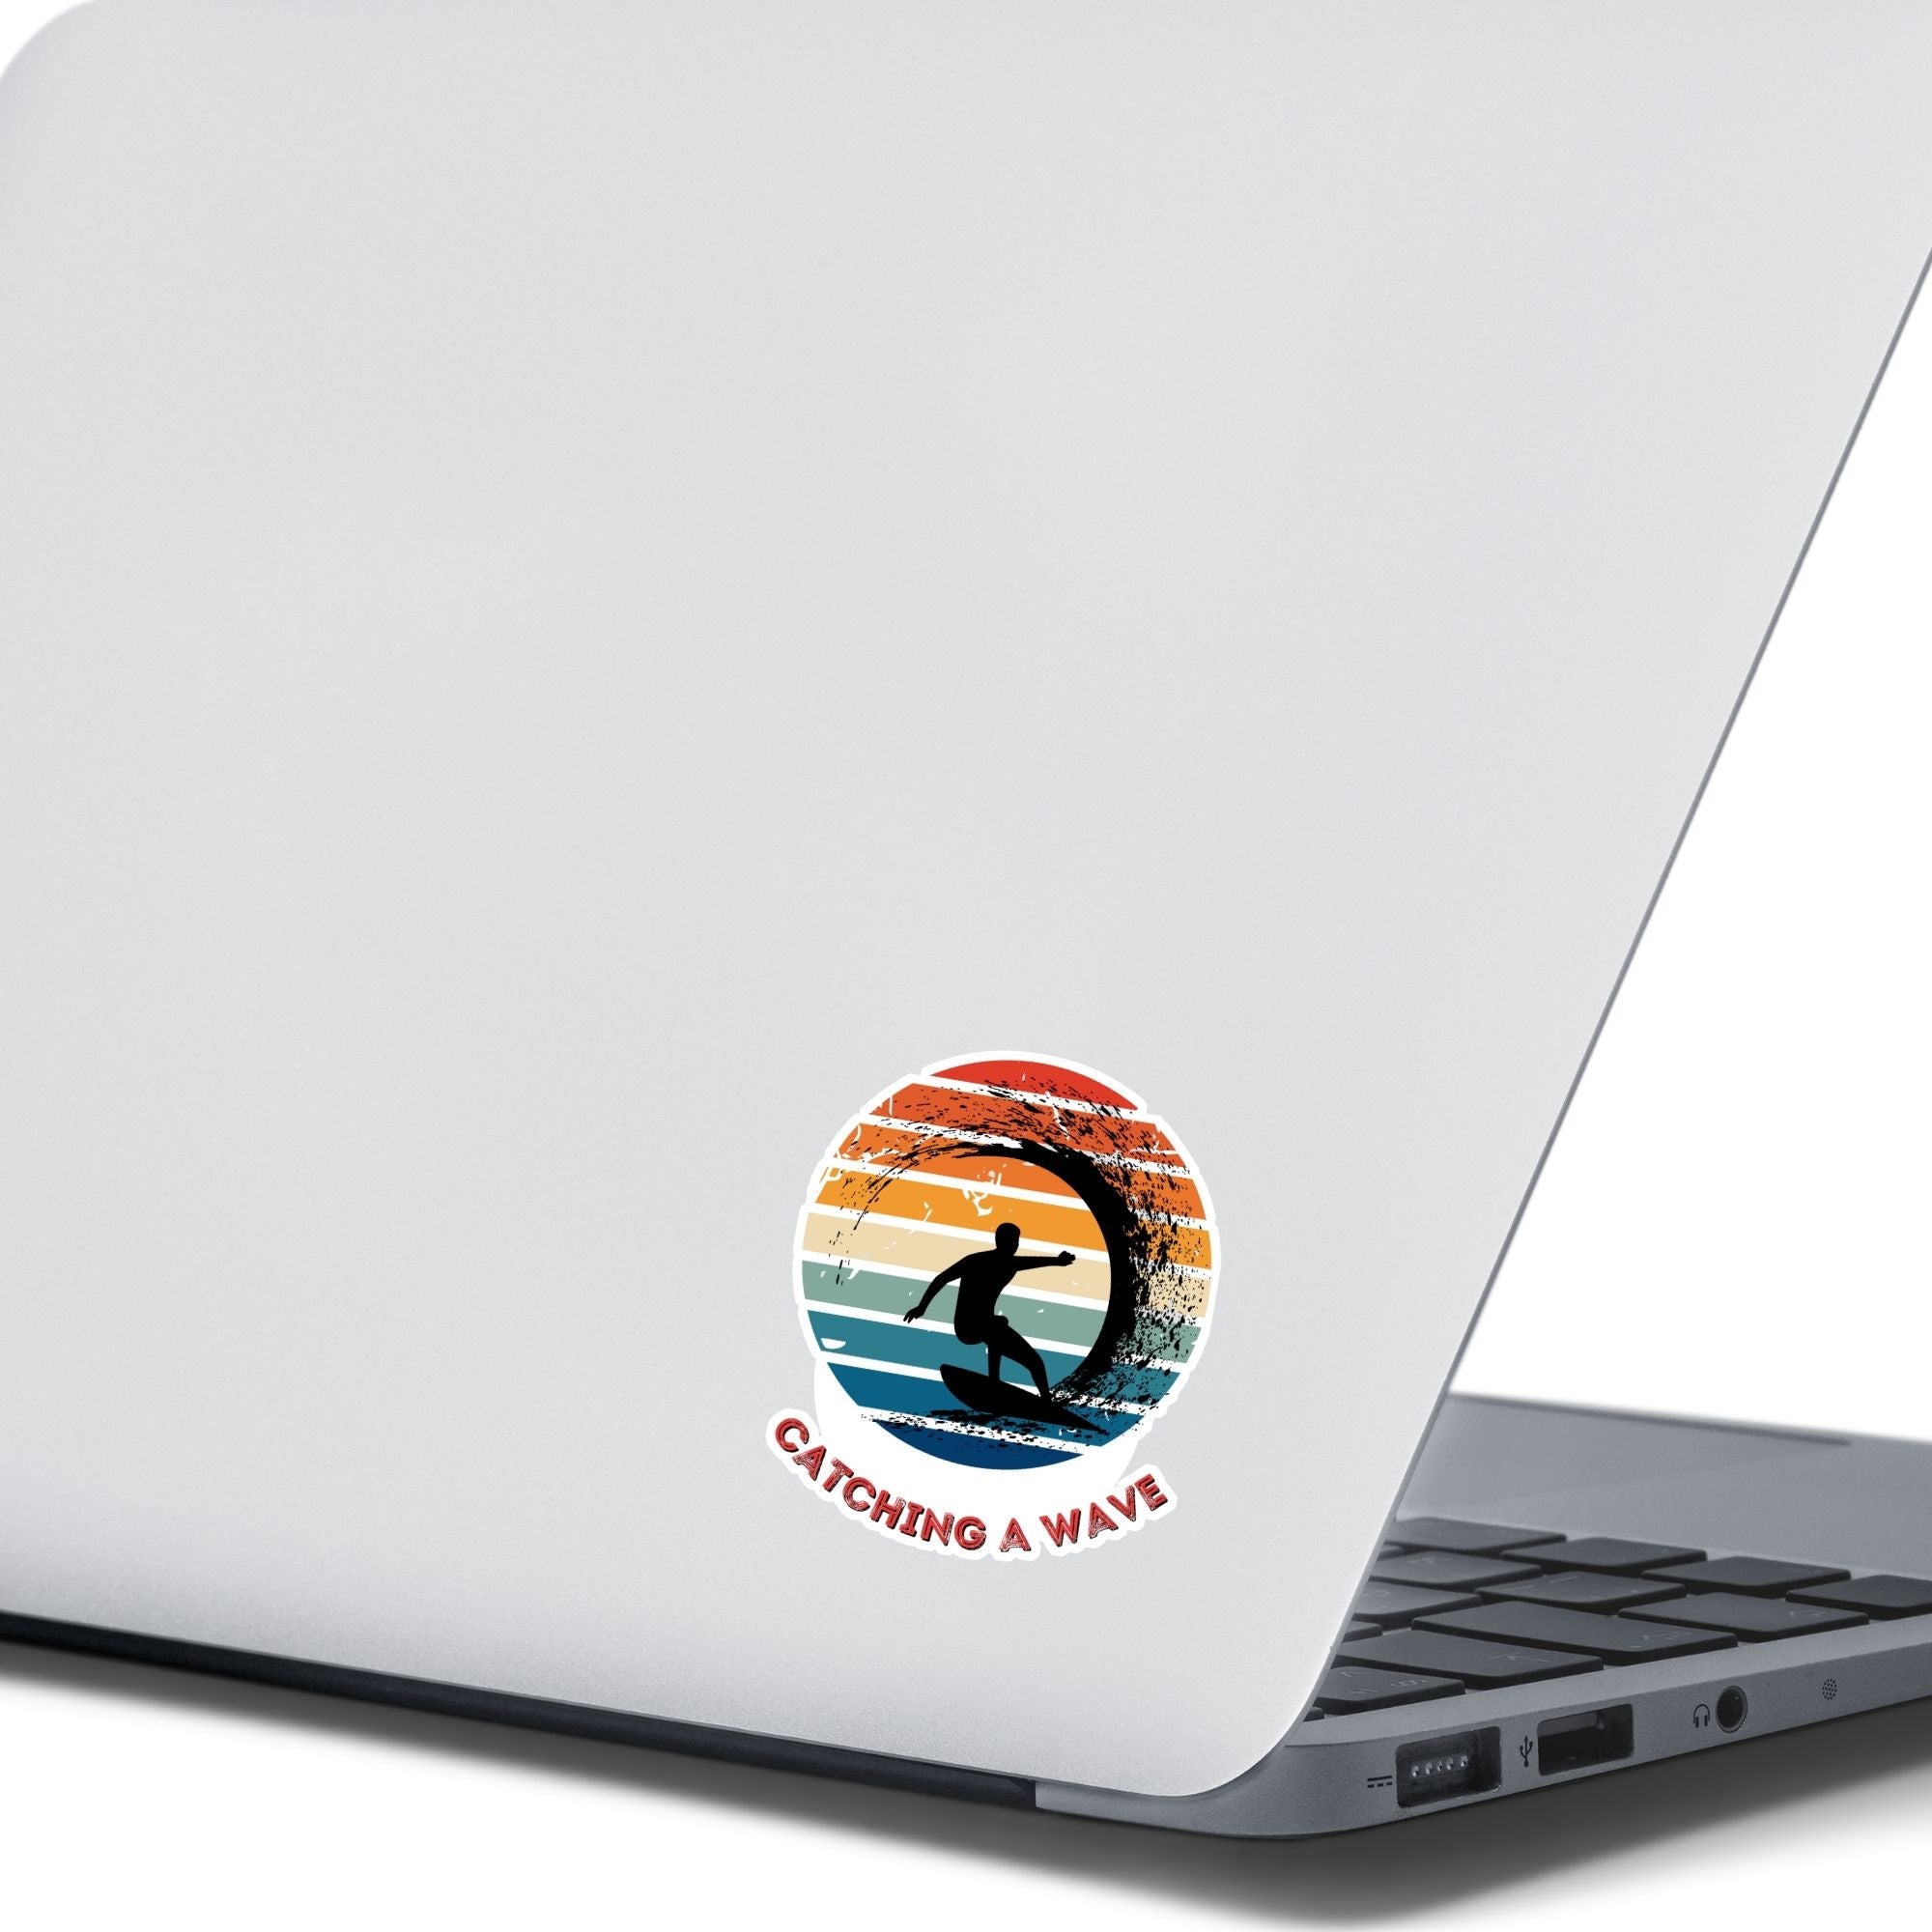 Hang 10 Bro! Catch a wave with this individual die-cut sticker featuring the silhouette of a male surfer inside the tube, all on a colored gradient background. Cowabunga!  This image shows the Catching a Wave sticker on the back of an open laptop.